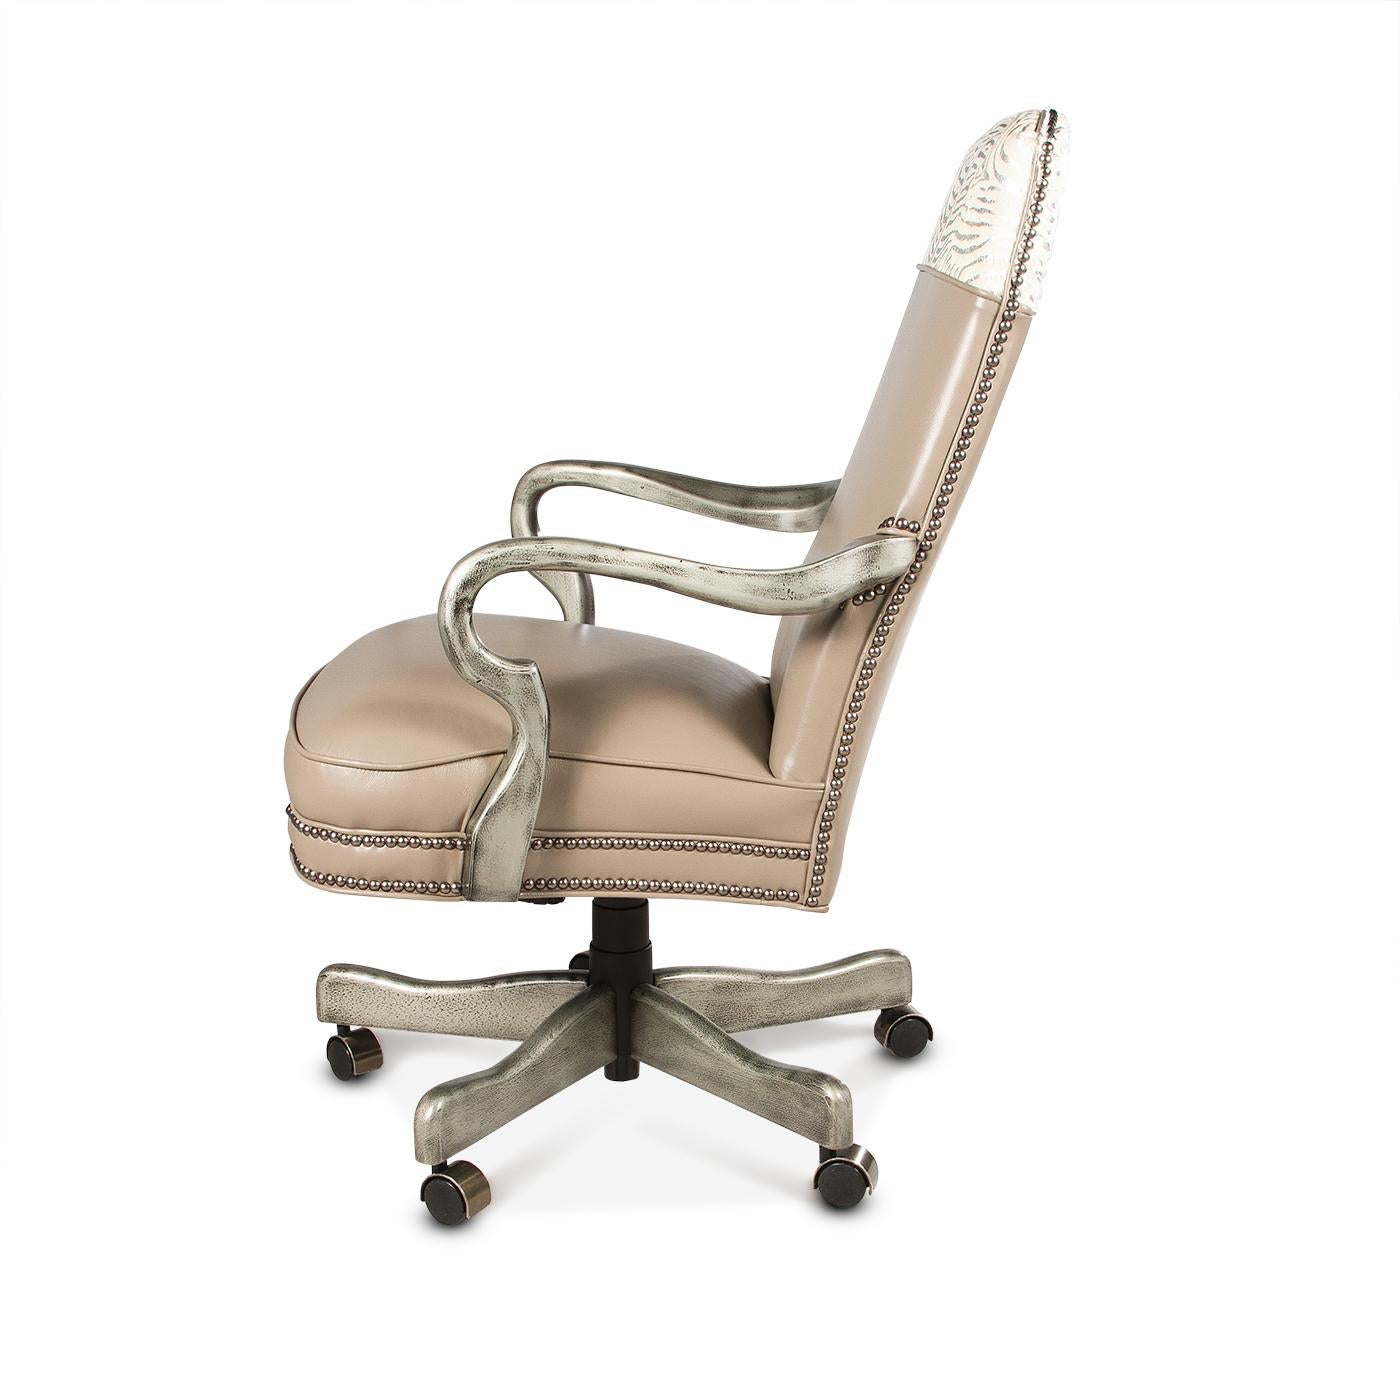 This one-of-a-kind silver leather office chair is made with top grain high-quality leather with an exotic silver leafed hair on hyde. The high back office chair has natural brass nailhead details and the shepherd's crook arm is finished in our dark